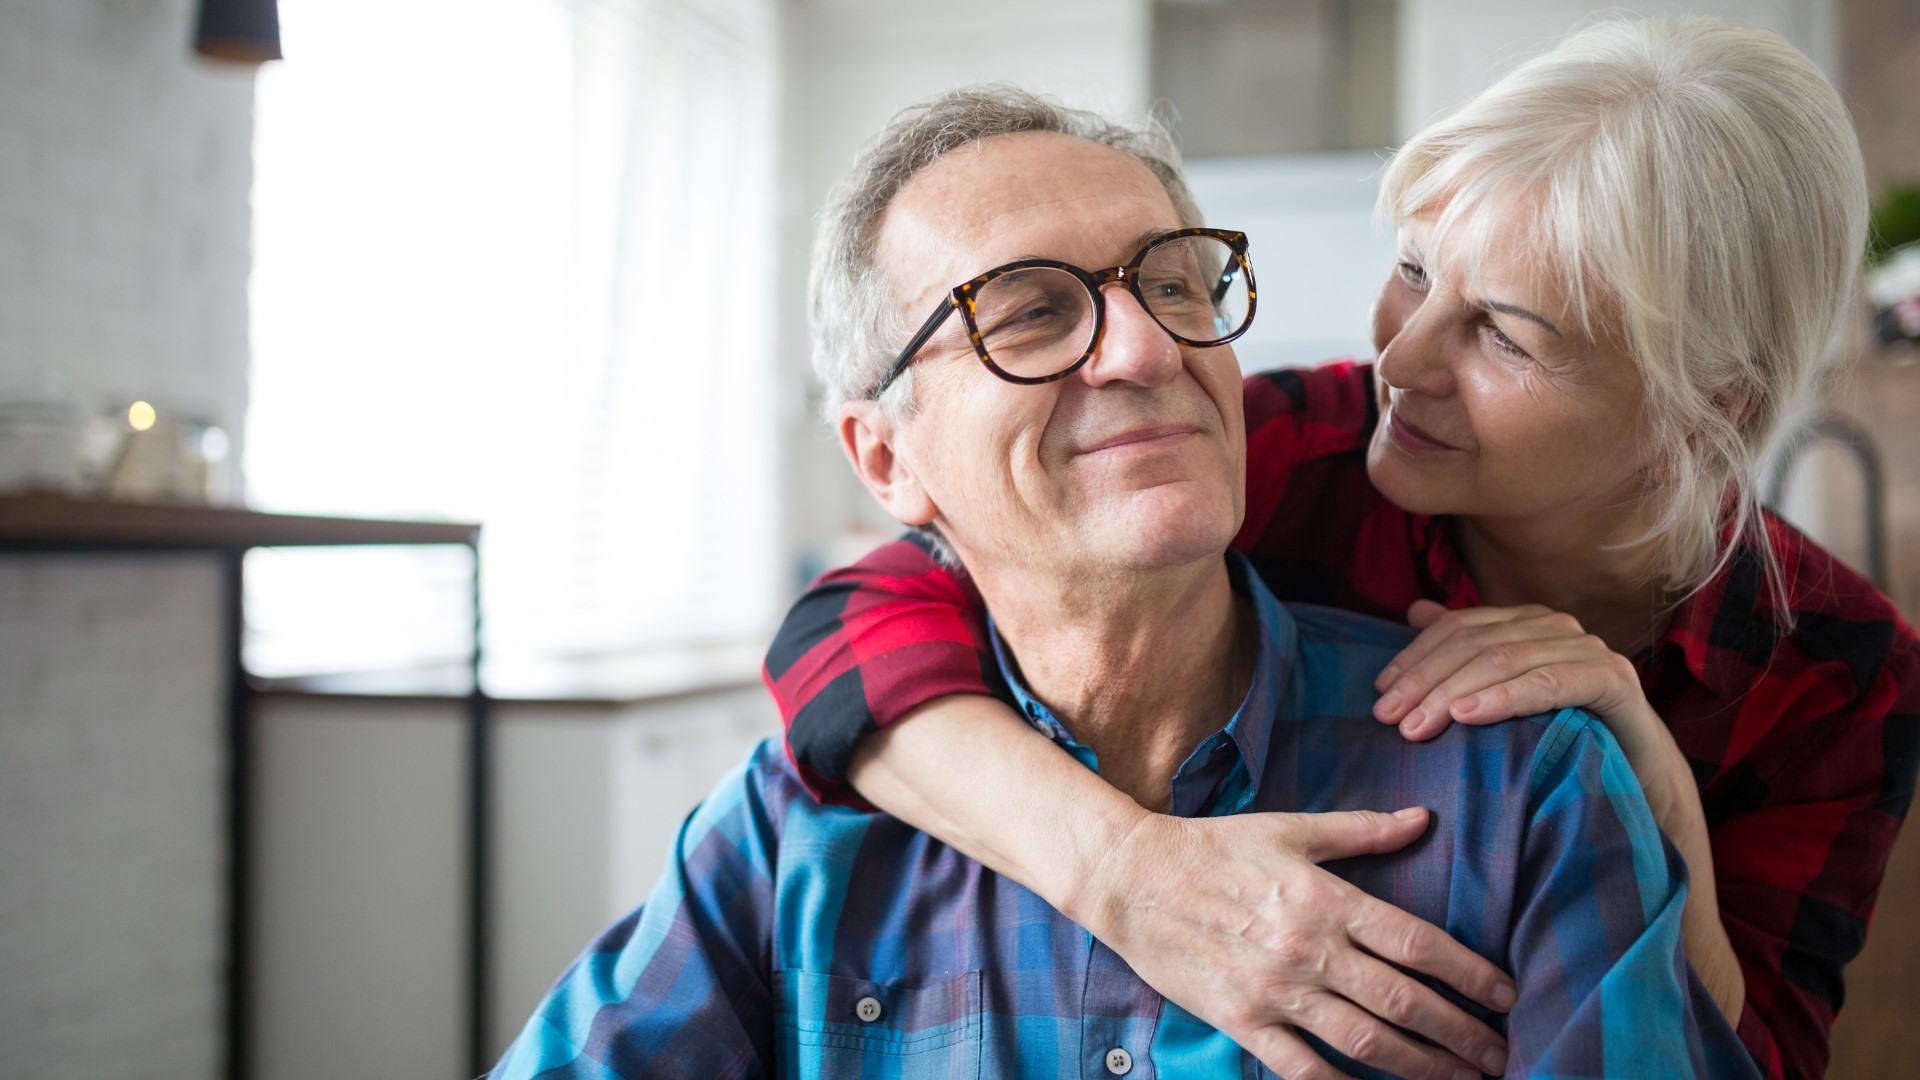 The one thing most of us dread about growing older is the possibility of having to move into assisted living. There are programs that will allow you to stay at home longer including MI Choice Medicaid Waiver.